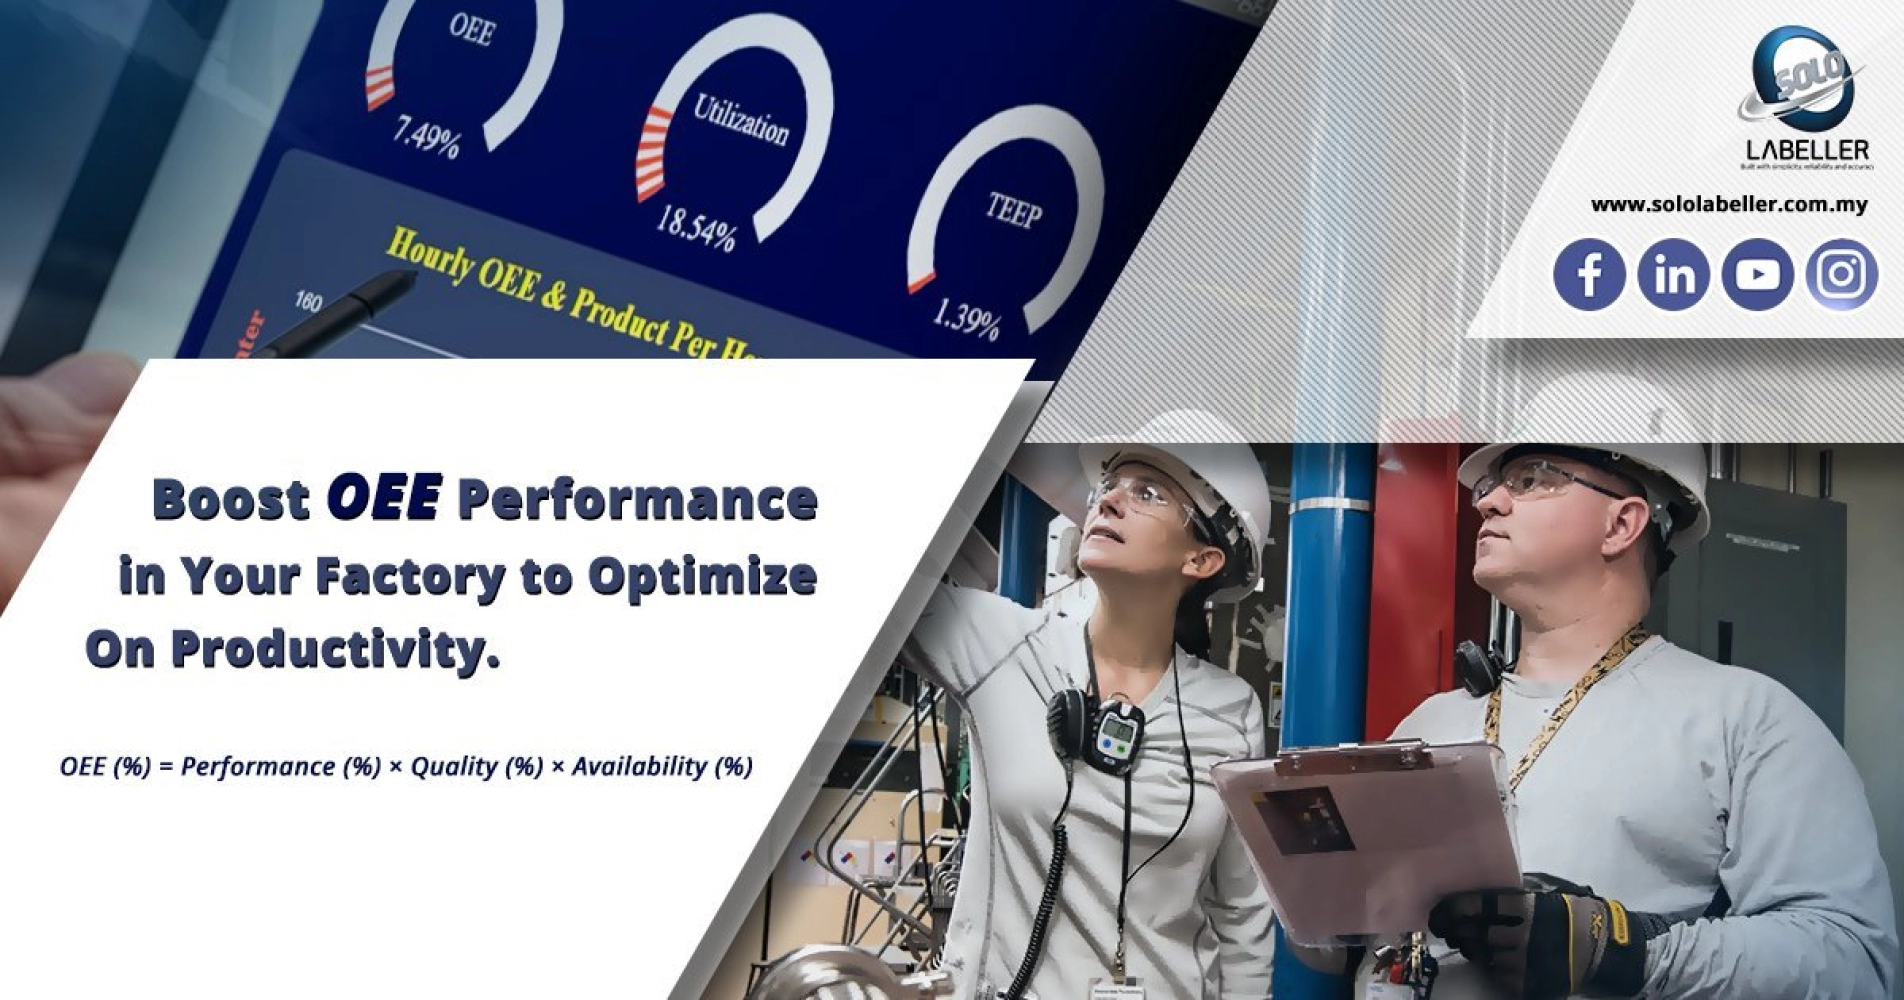 Boost OEE Performance to Optimise Productivity in Factory